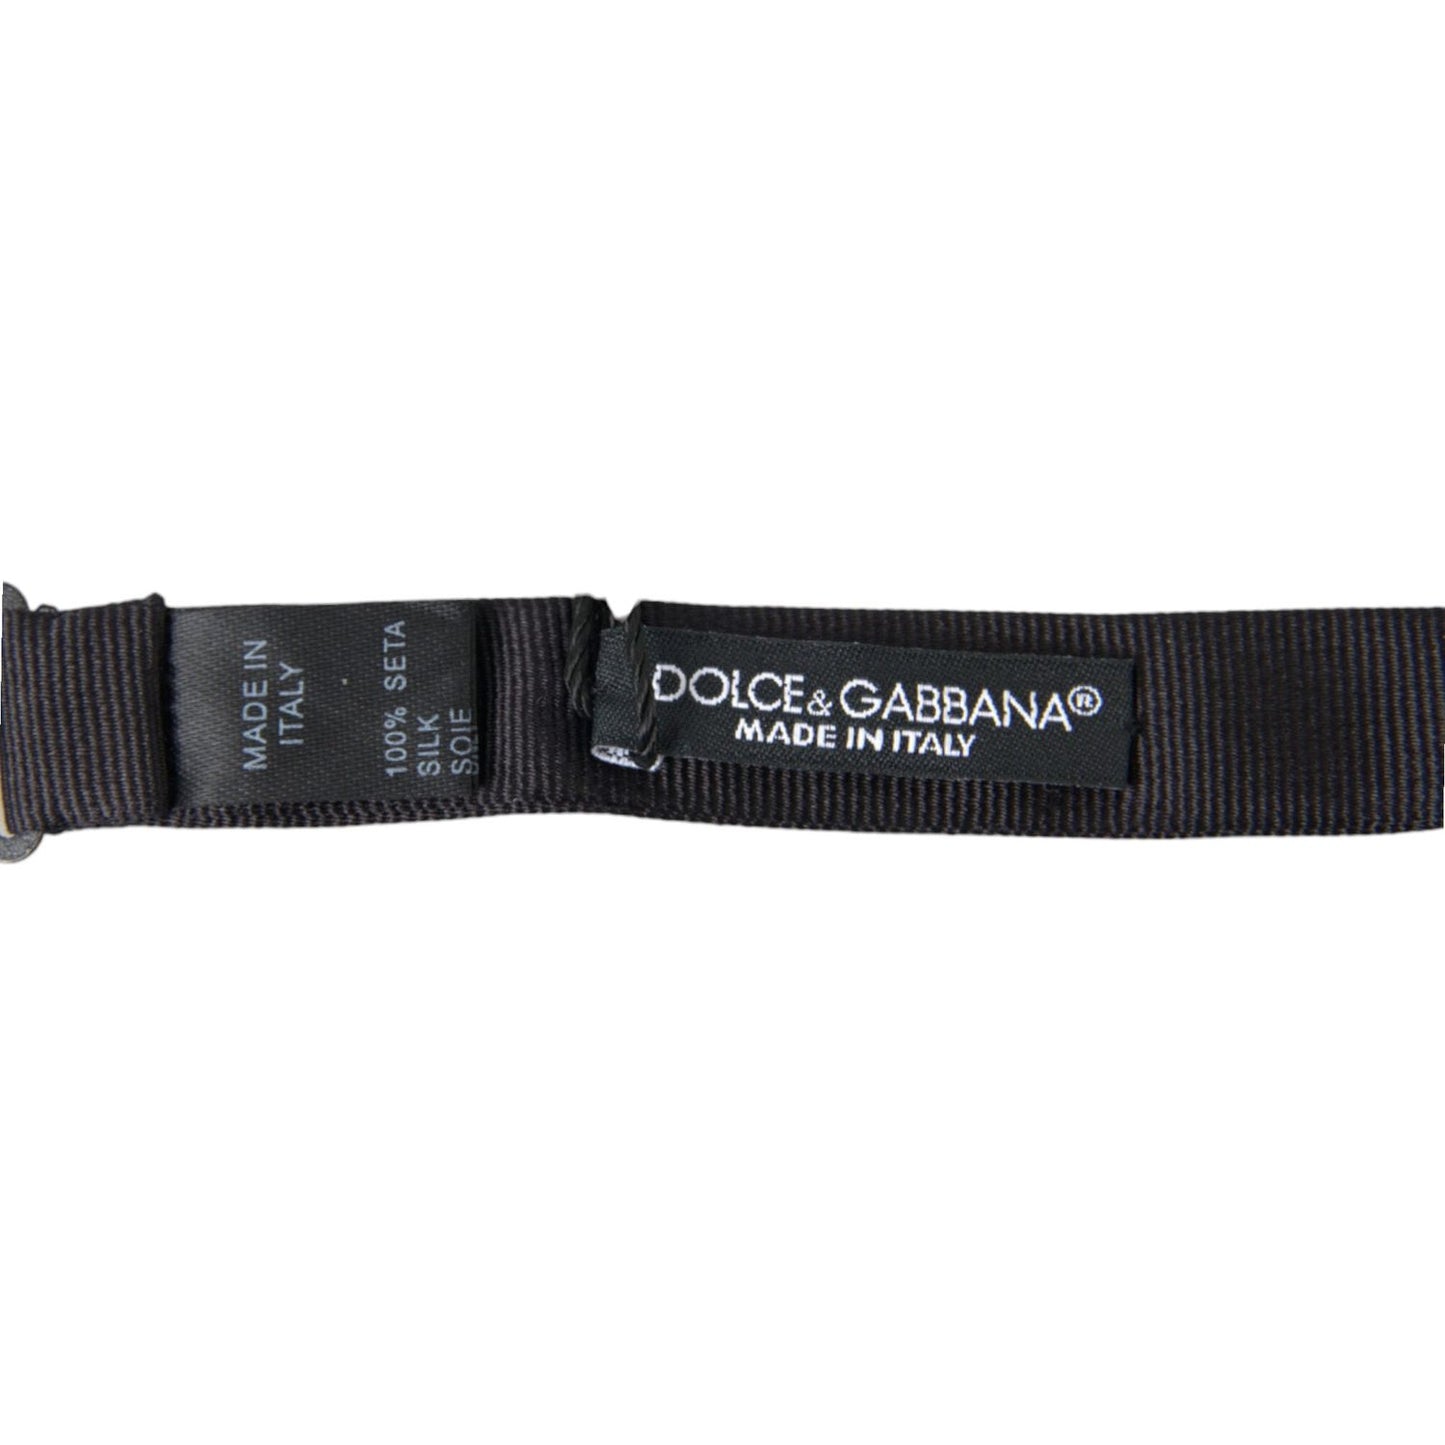 Dolce & Gabbana Elegant Silk Black Bow Tie for Sophisticated Style black-solid-silk-adjustable-neck-papillon-bow-tie 465A6903-BG-scaled-f977f387-fa3.jpg